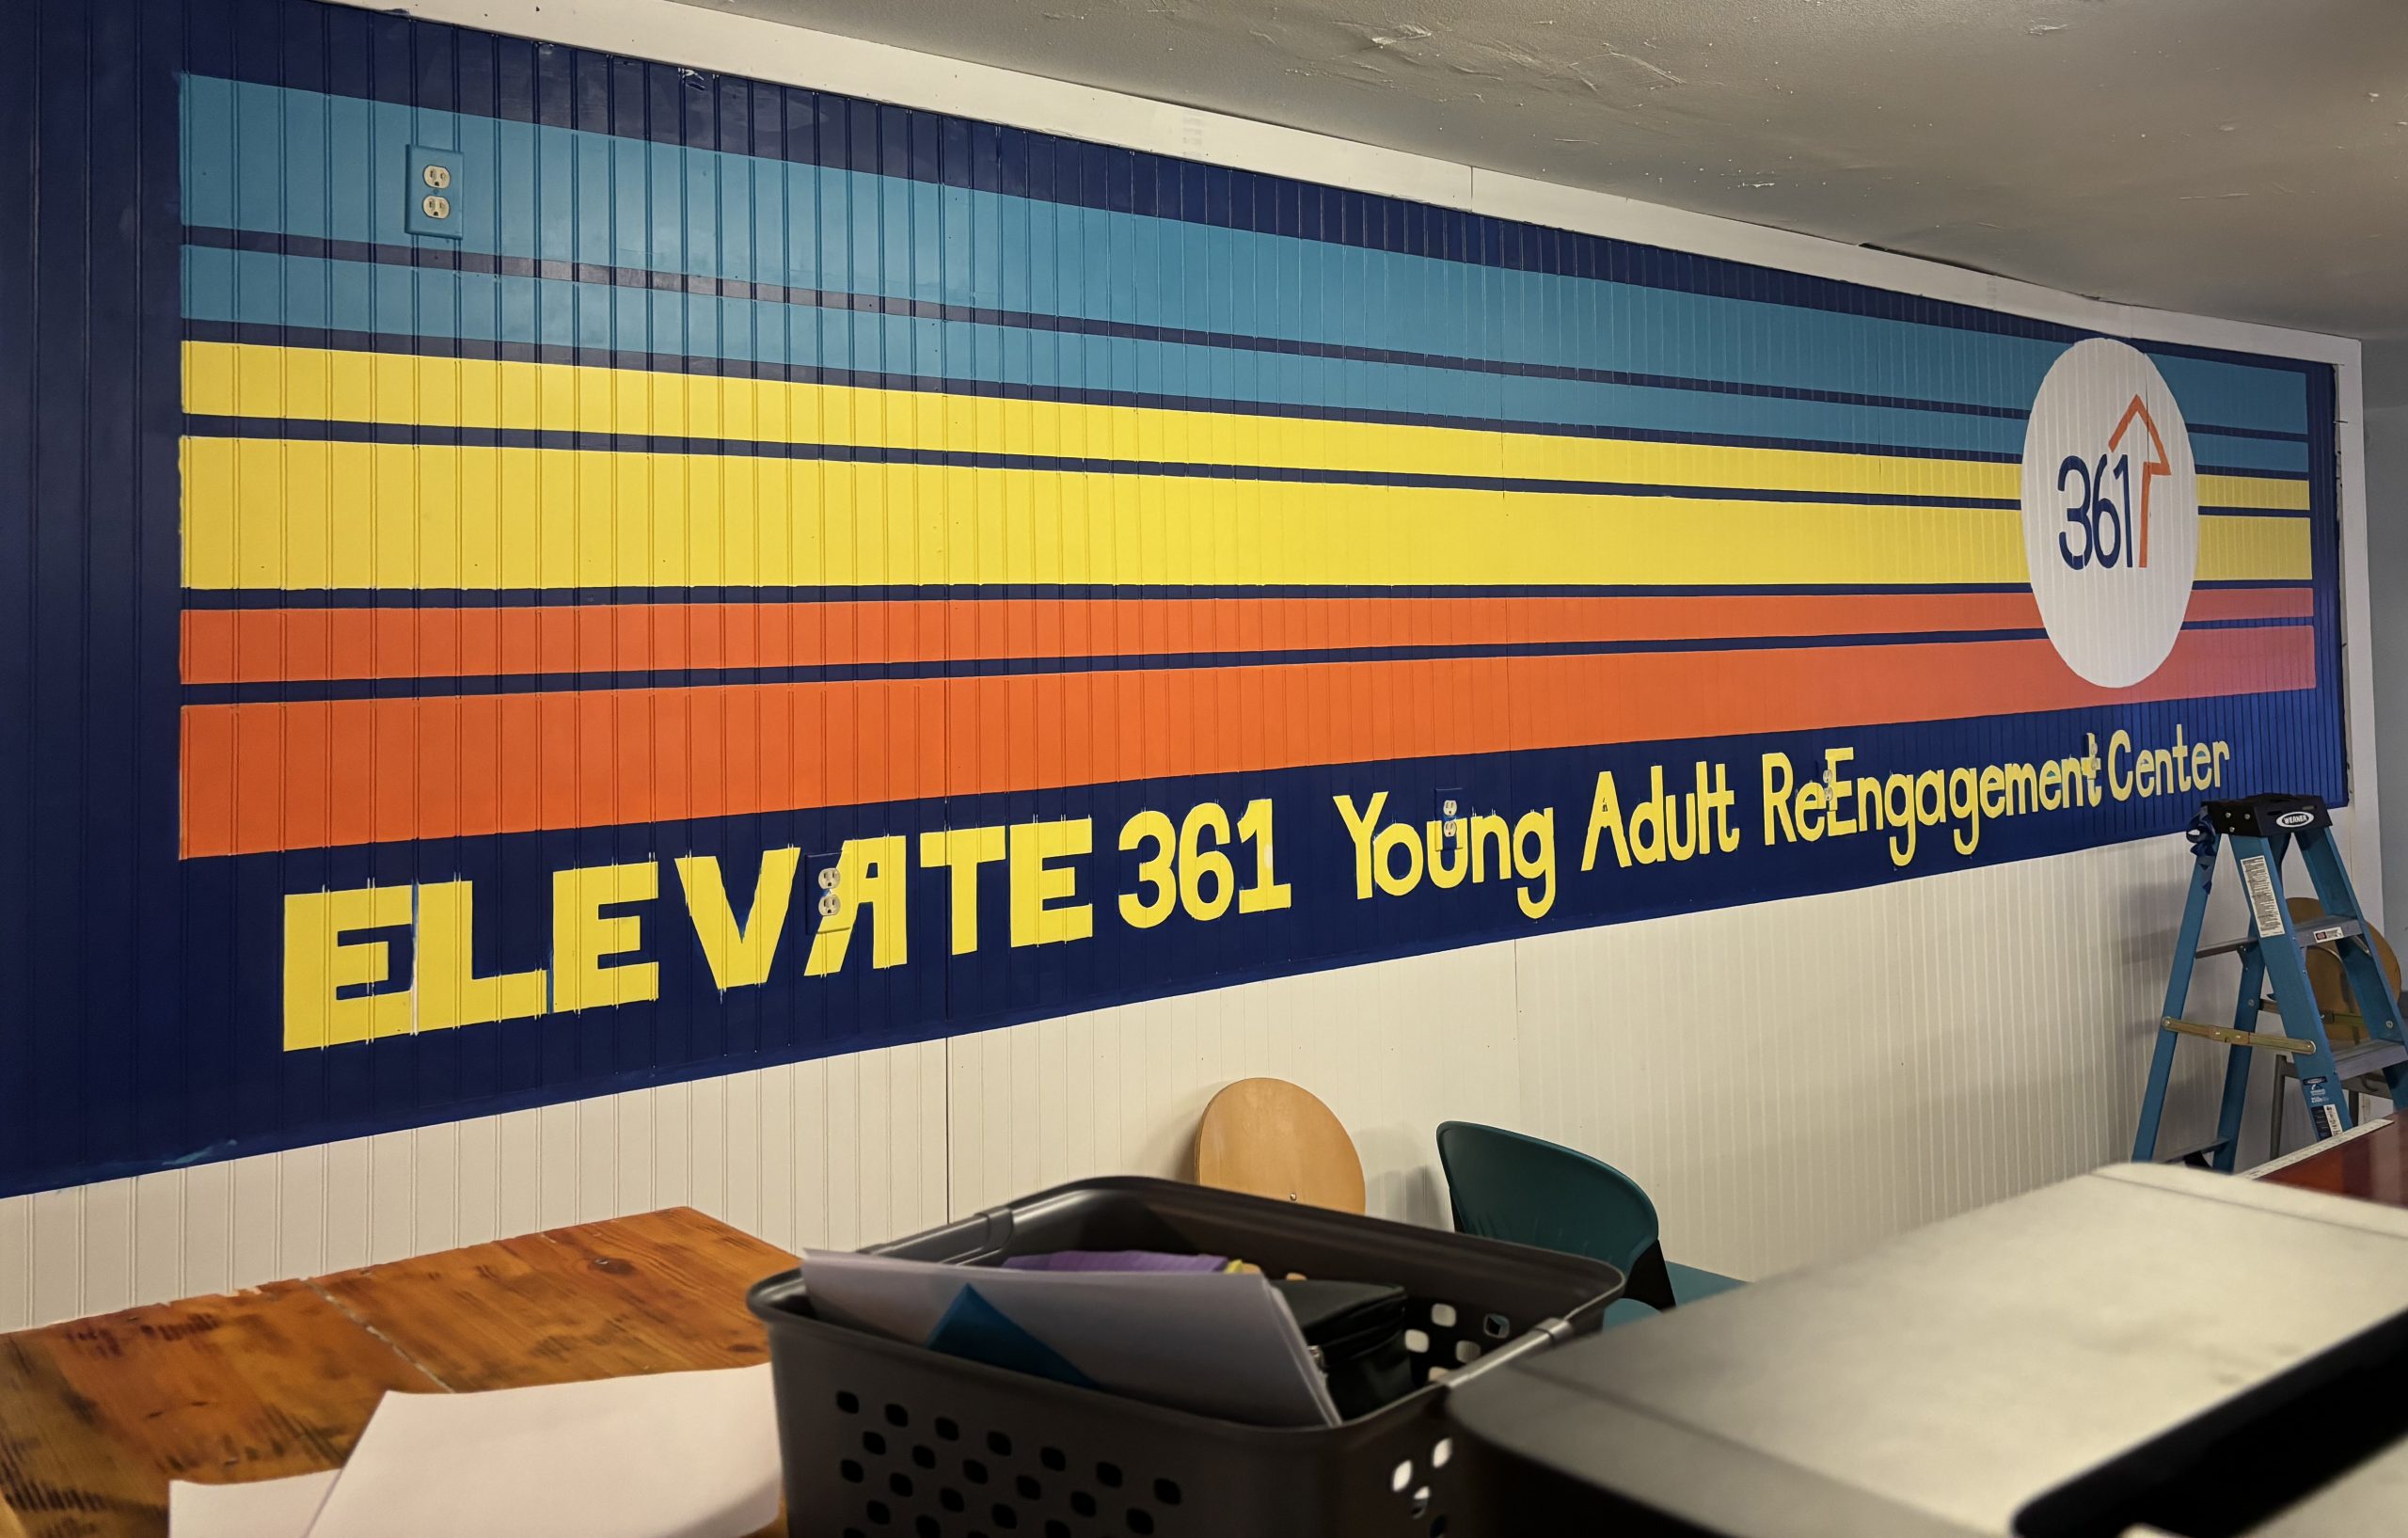 Elevate 361 benefits young adults in Nueces County